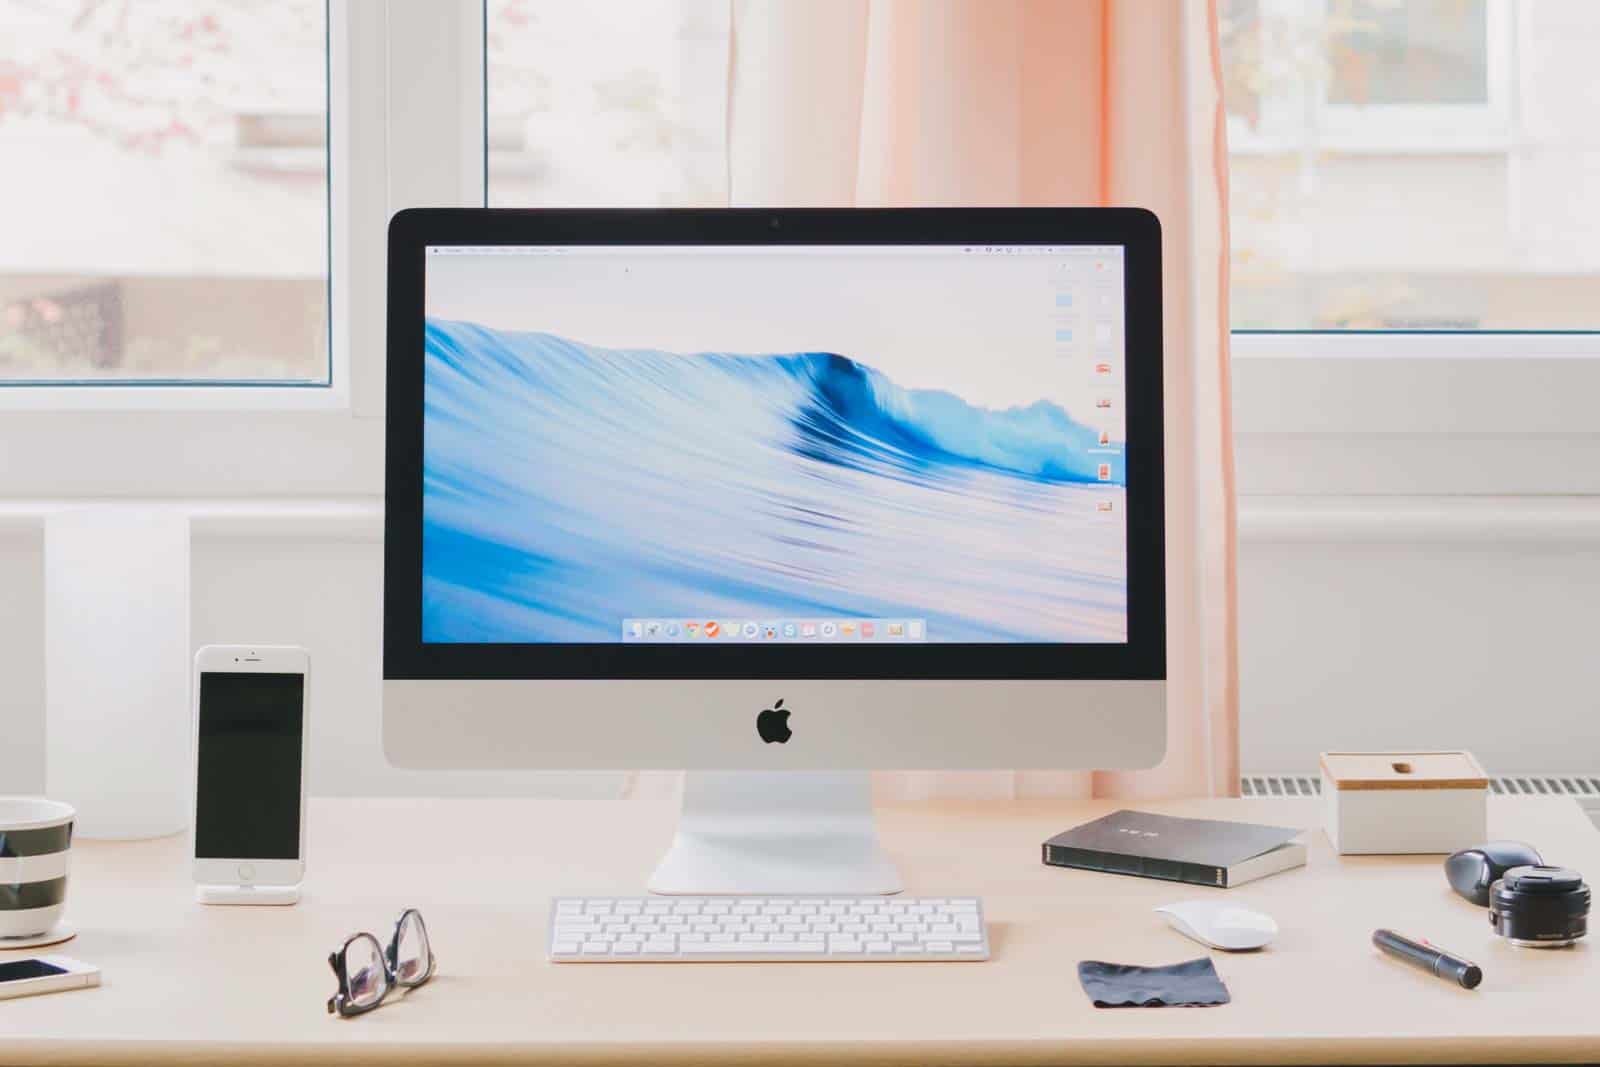 How Can I Use My iMac As A Wi-Fi Hotspot?